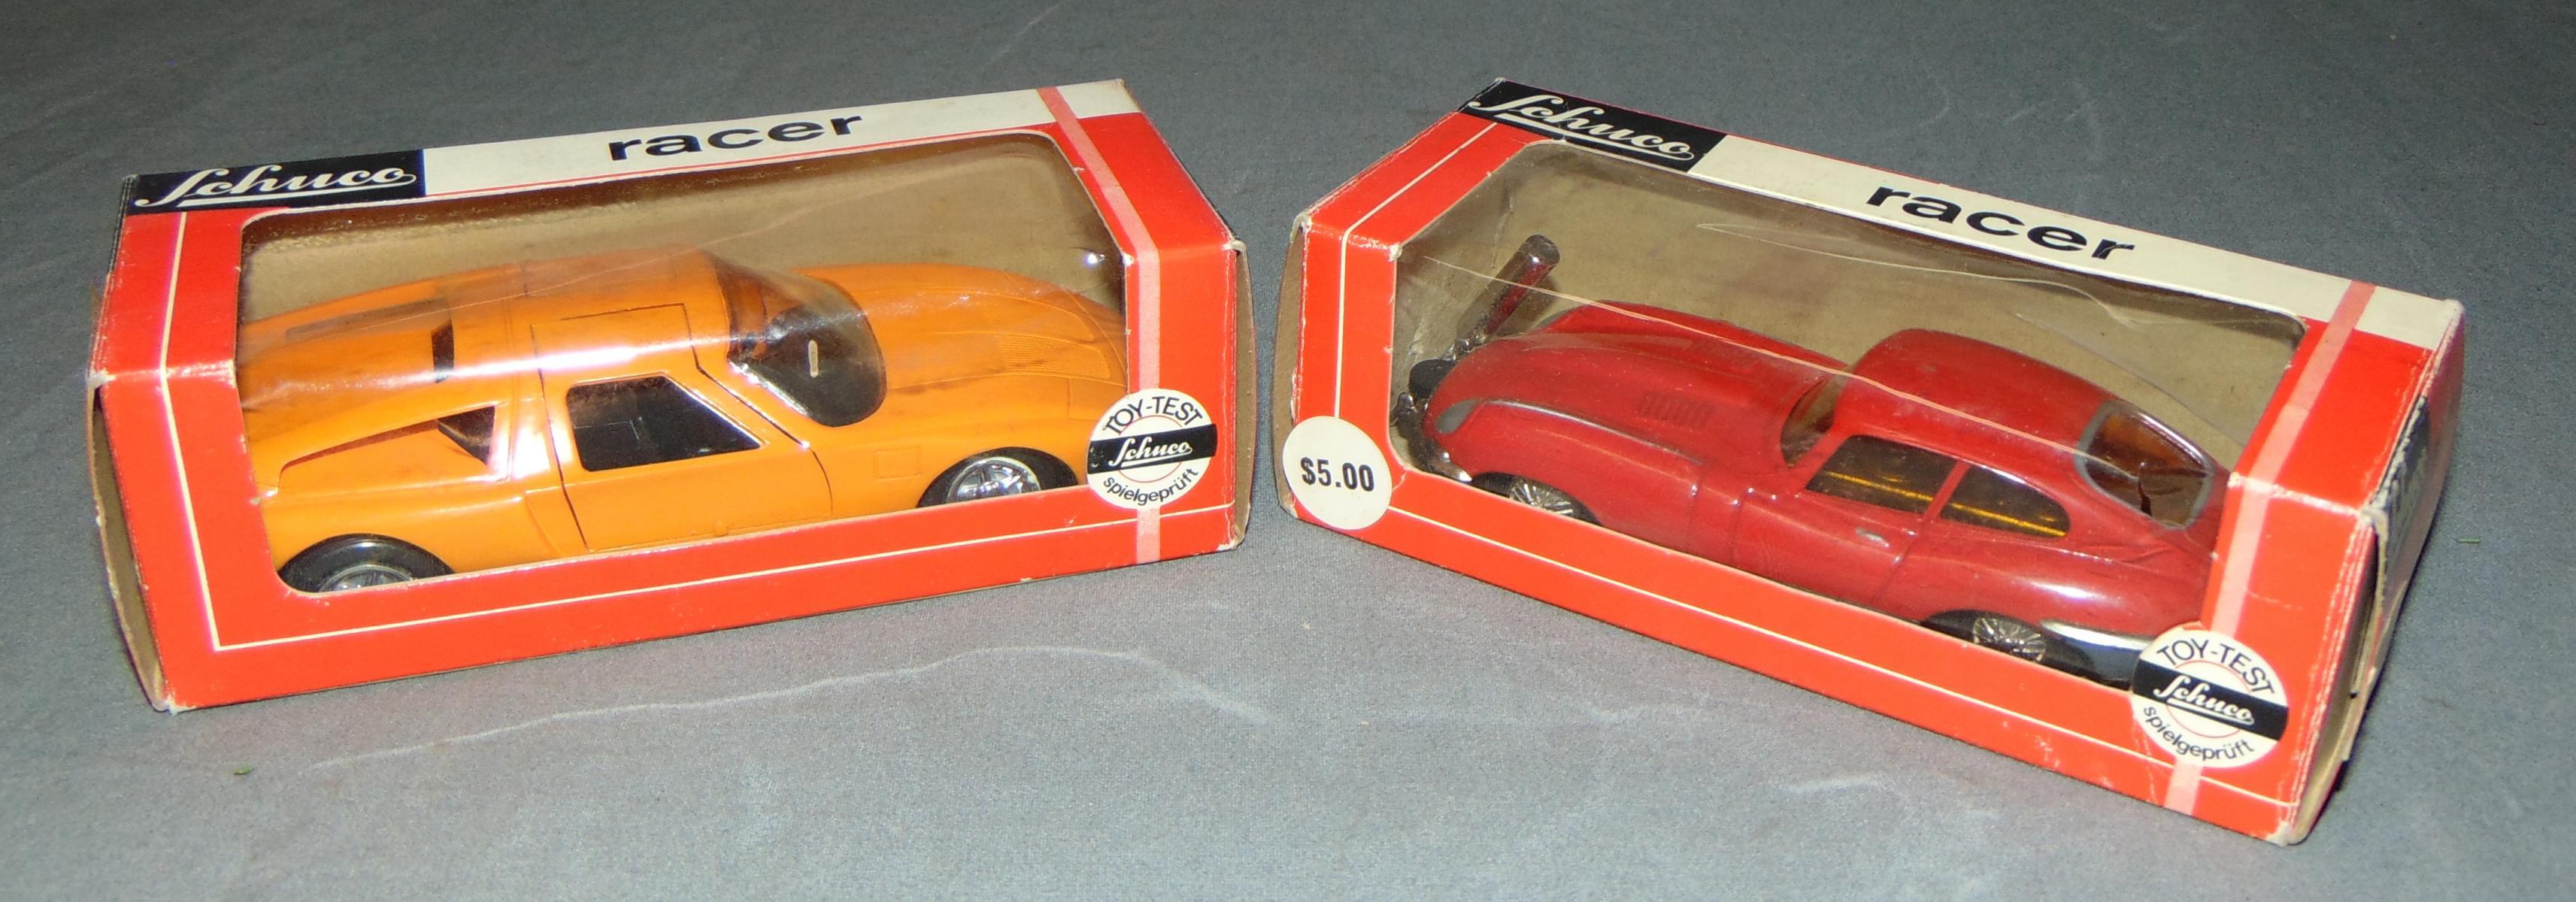 3 Boxed Schuco Racers